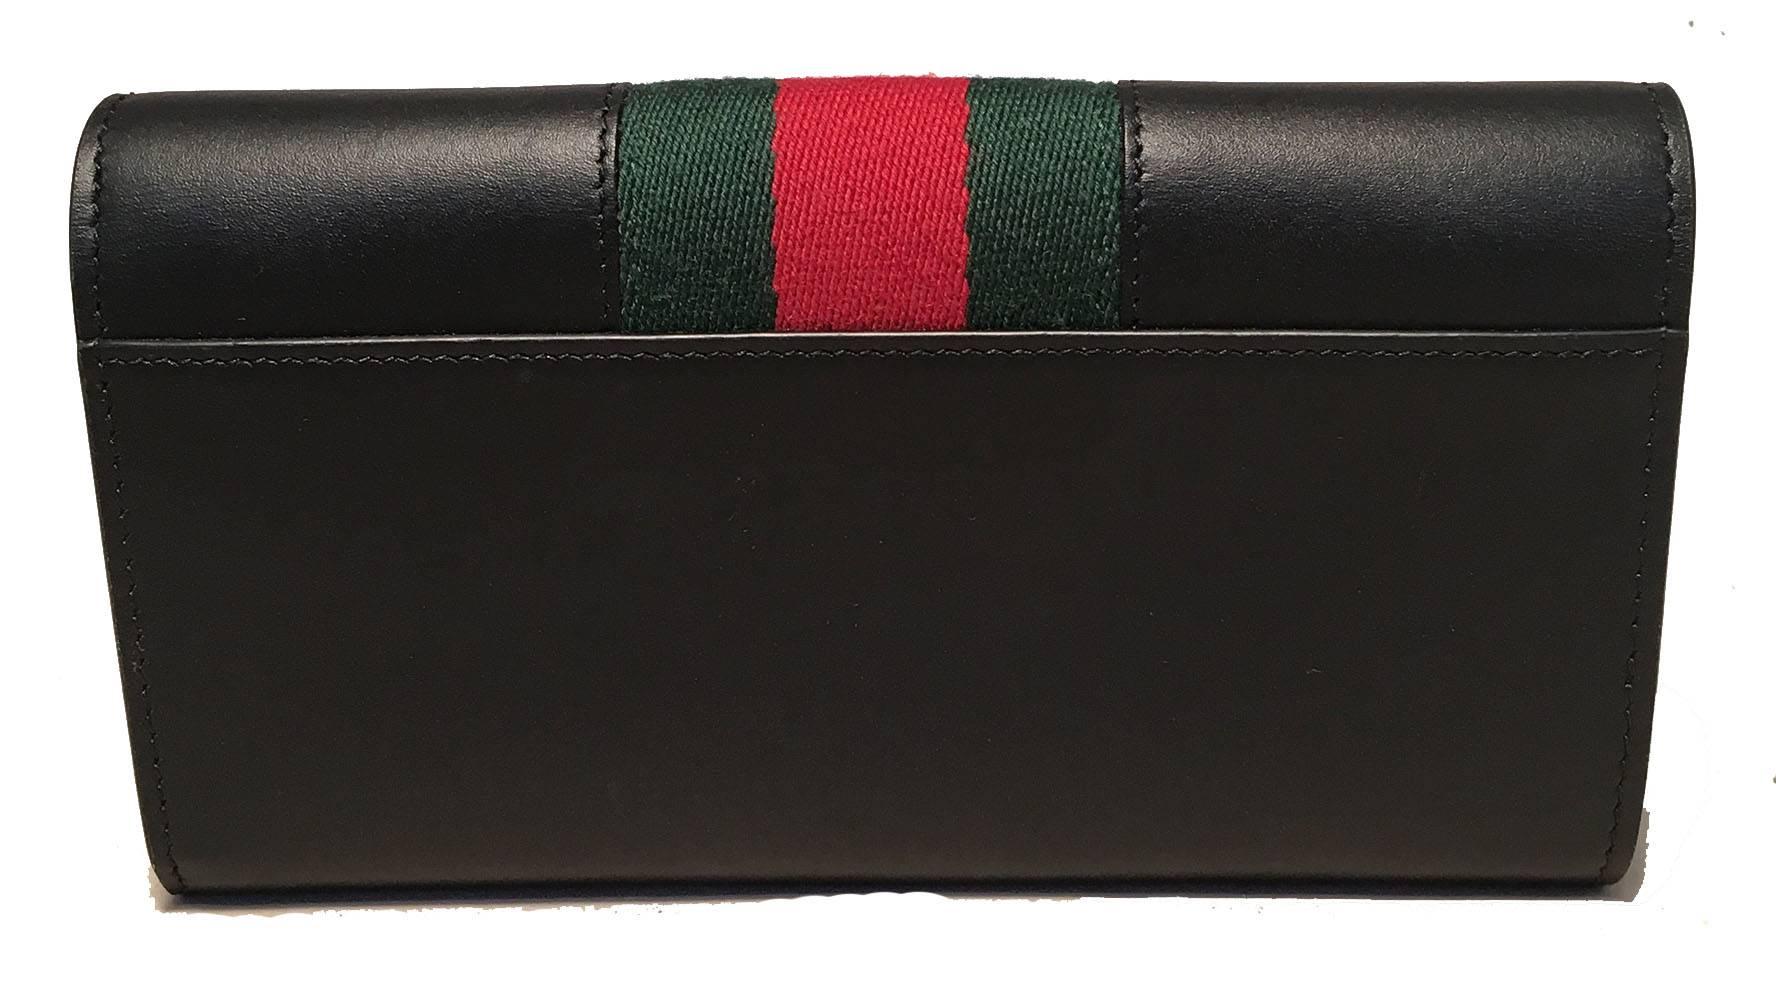 TIMELESS Gucci long sylvie wallet in excellent condition.  Navy blue leather exterior trimmed with signature red and green gucci canvas stripes along front with a gold buckle detail along top front flap. Snap flap closure opens to a navy leather